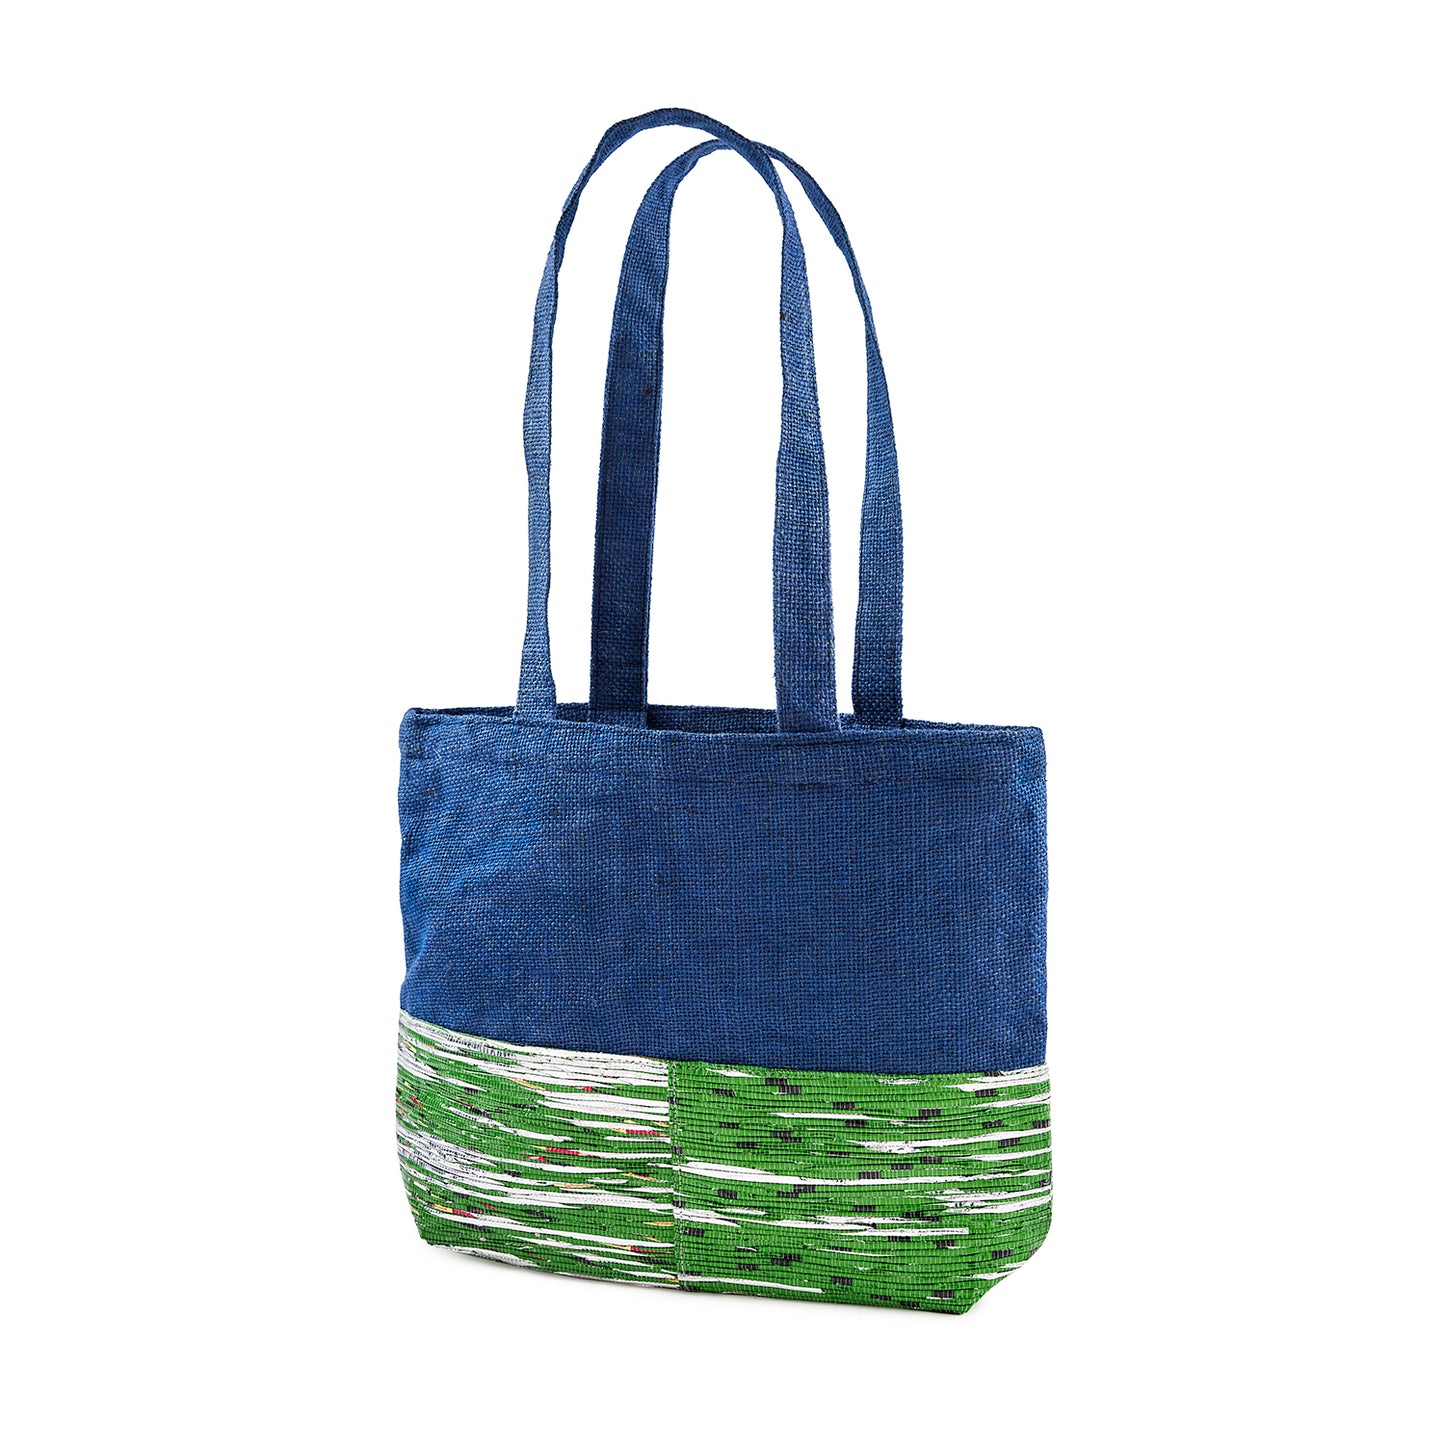 Blue Canvas Bag with Shamrock Green and Silver (Waste Plastic) bottom lining; on - SUPER SALE!!!